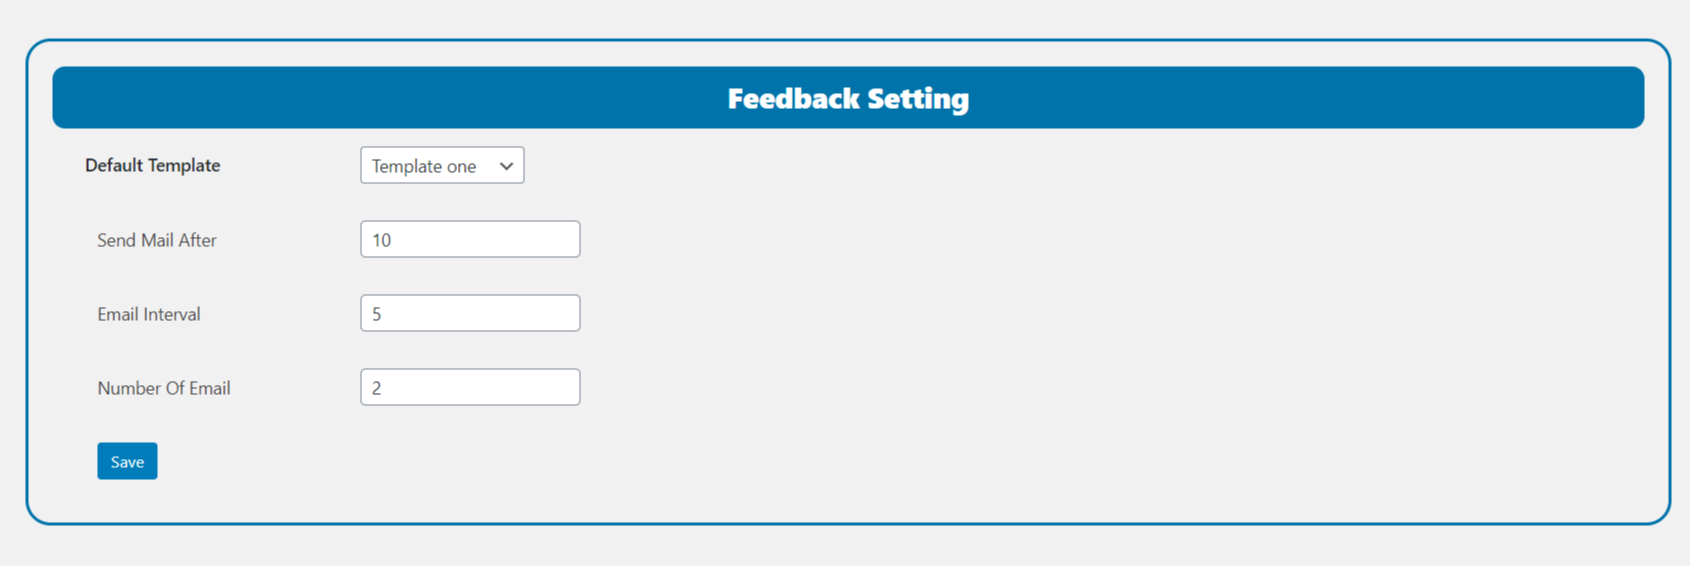 Feedback plugin seeting page for send email or set template.